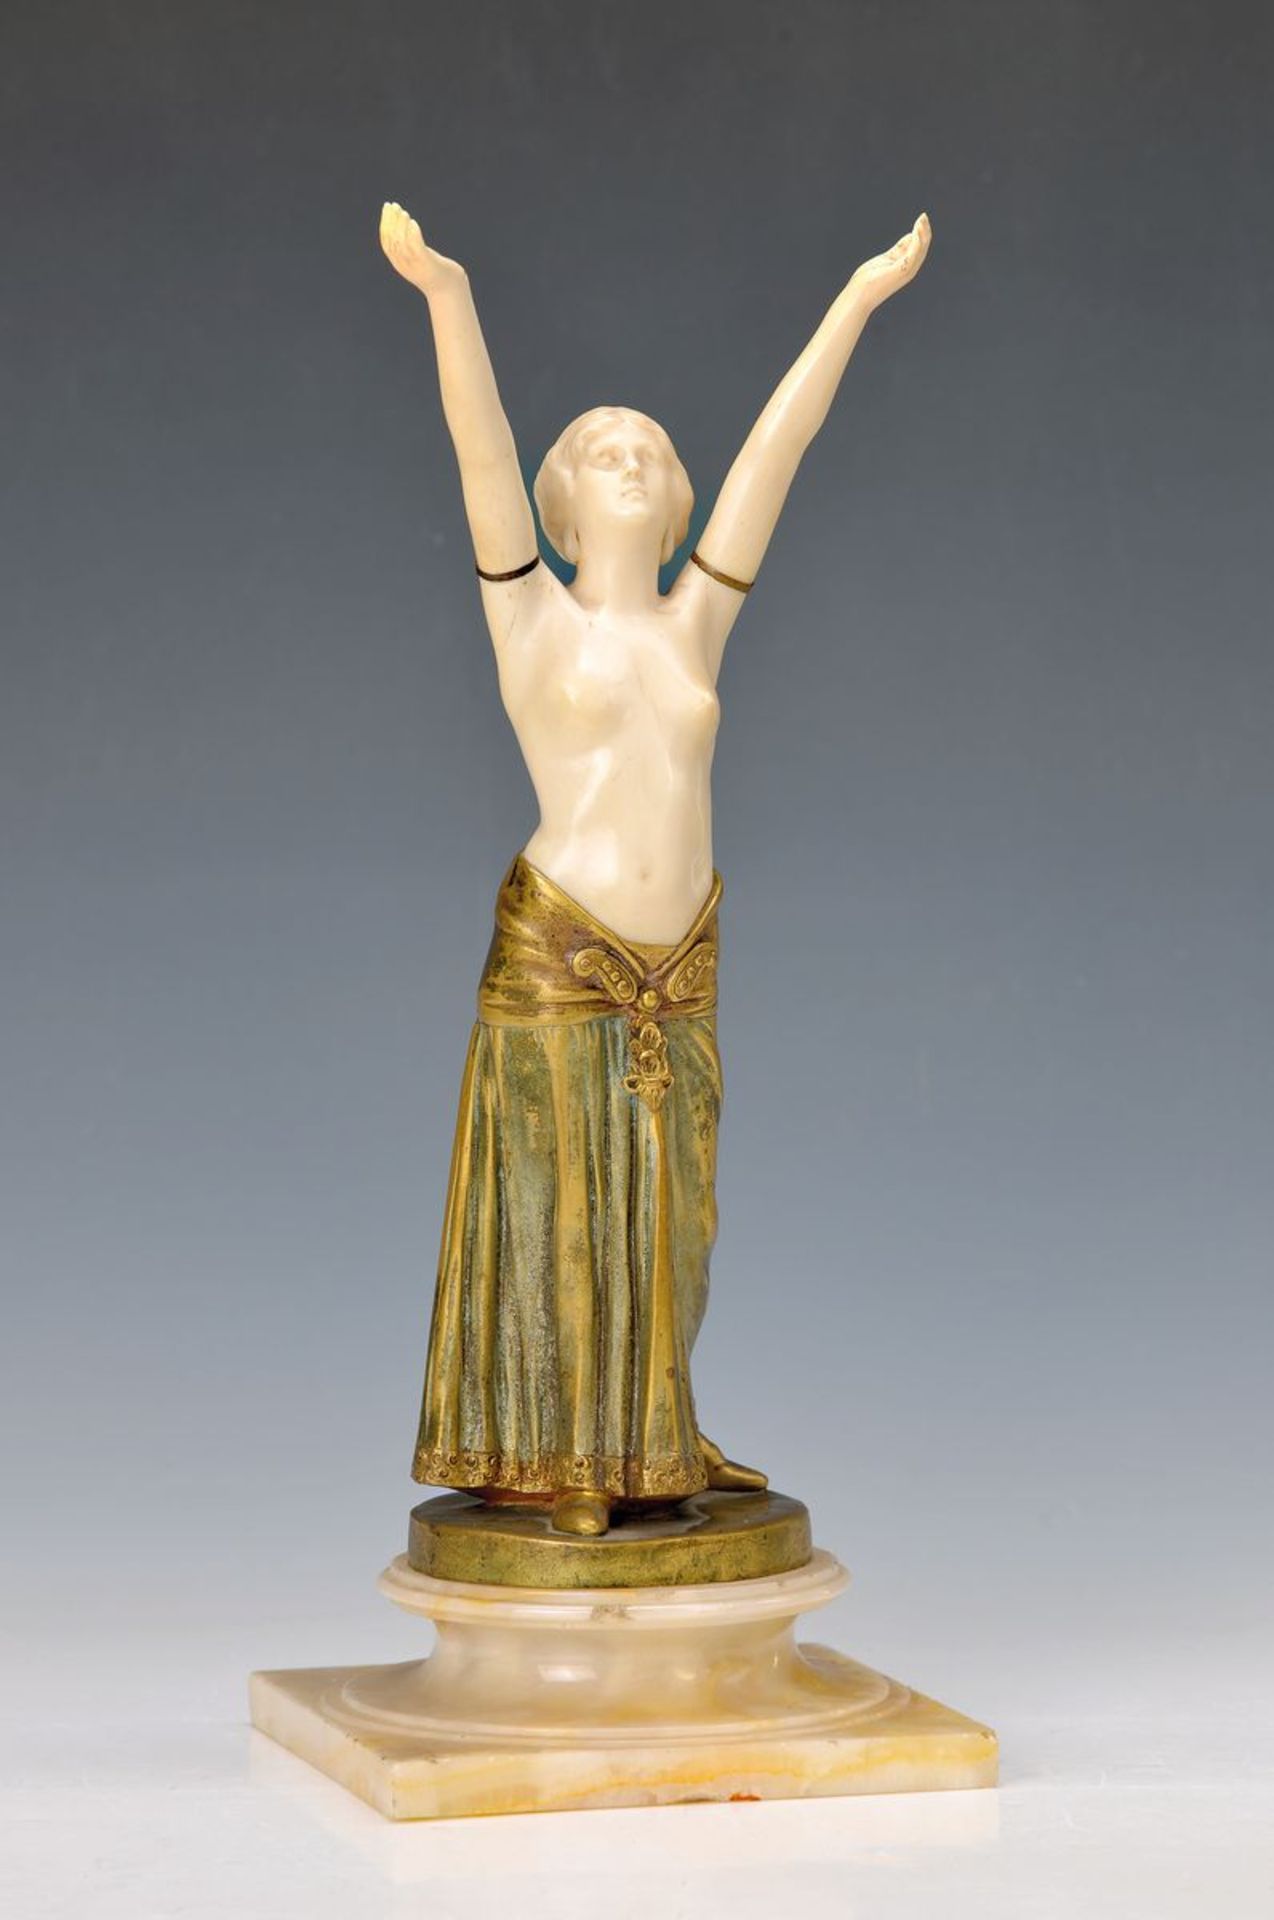 Charles Arthur Müller, born in 1868, ivory sculpture, female nude on hard stone pedestal standing,